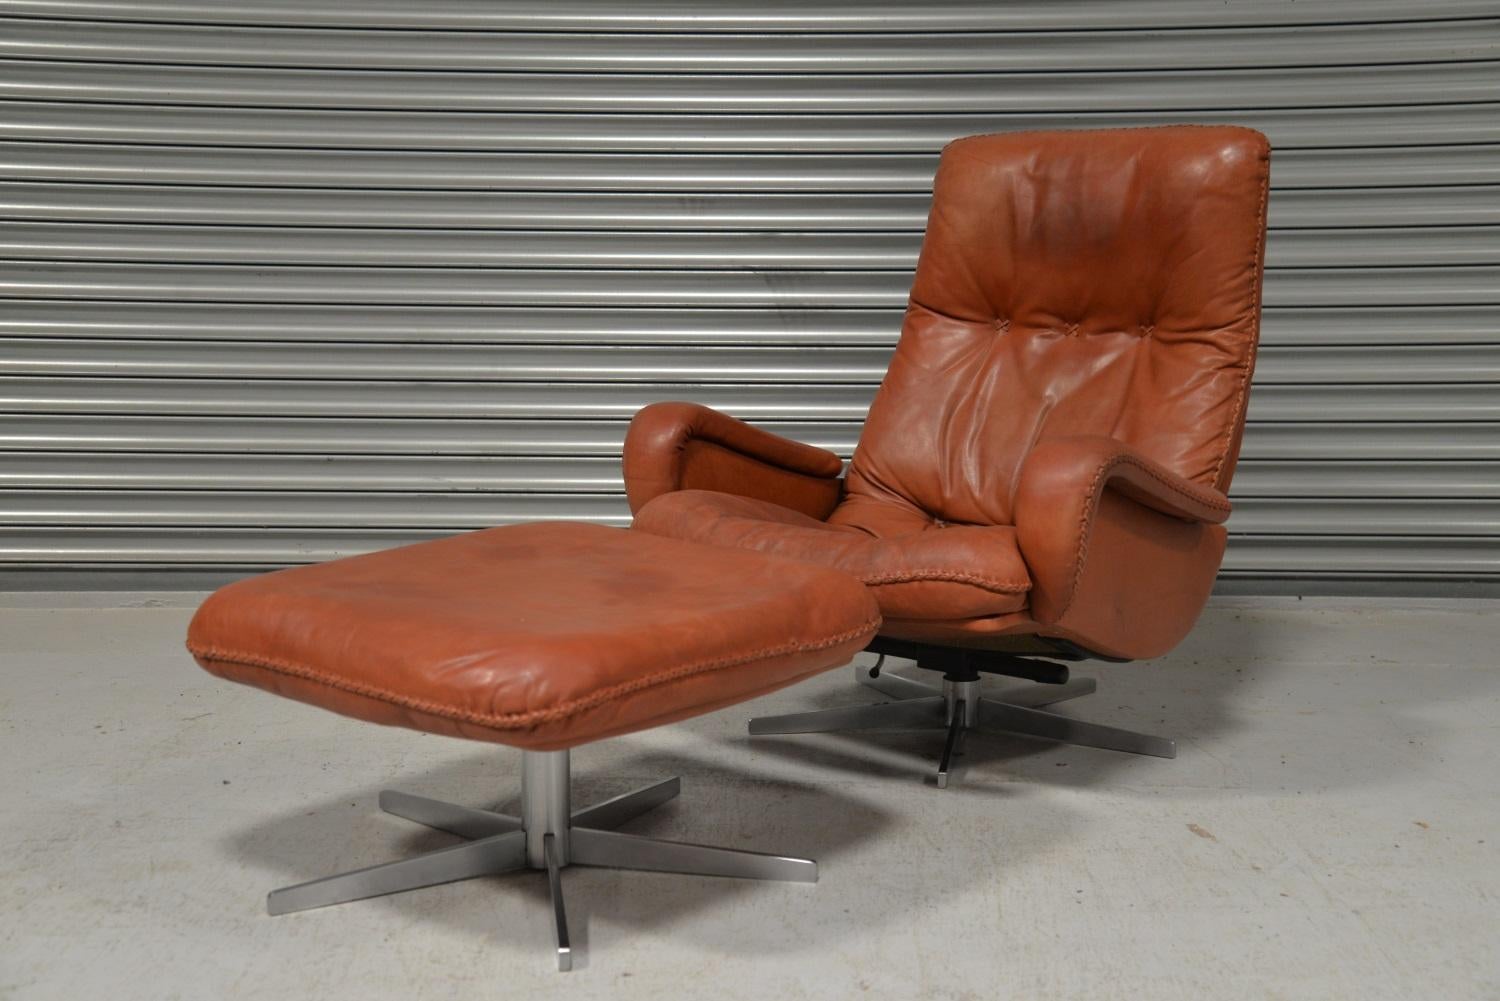 We are delighted to bring to you an ultra-rare and highly desirable De Sede S 231 vintage leather swivel armchair and ottoman. Built in the late 1960s by De Sede craftsman from Switzerland this same chair was used as a prop in the 1969 James Bond